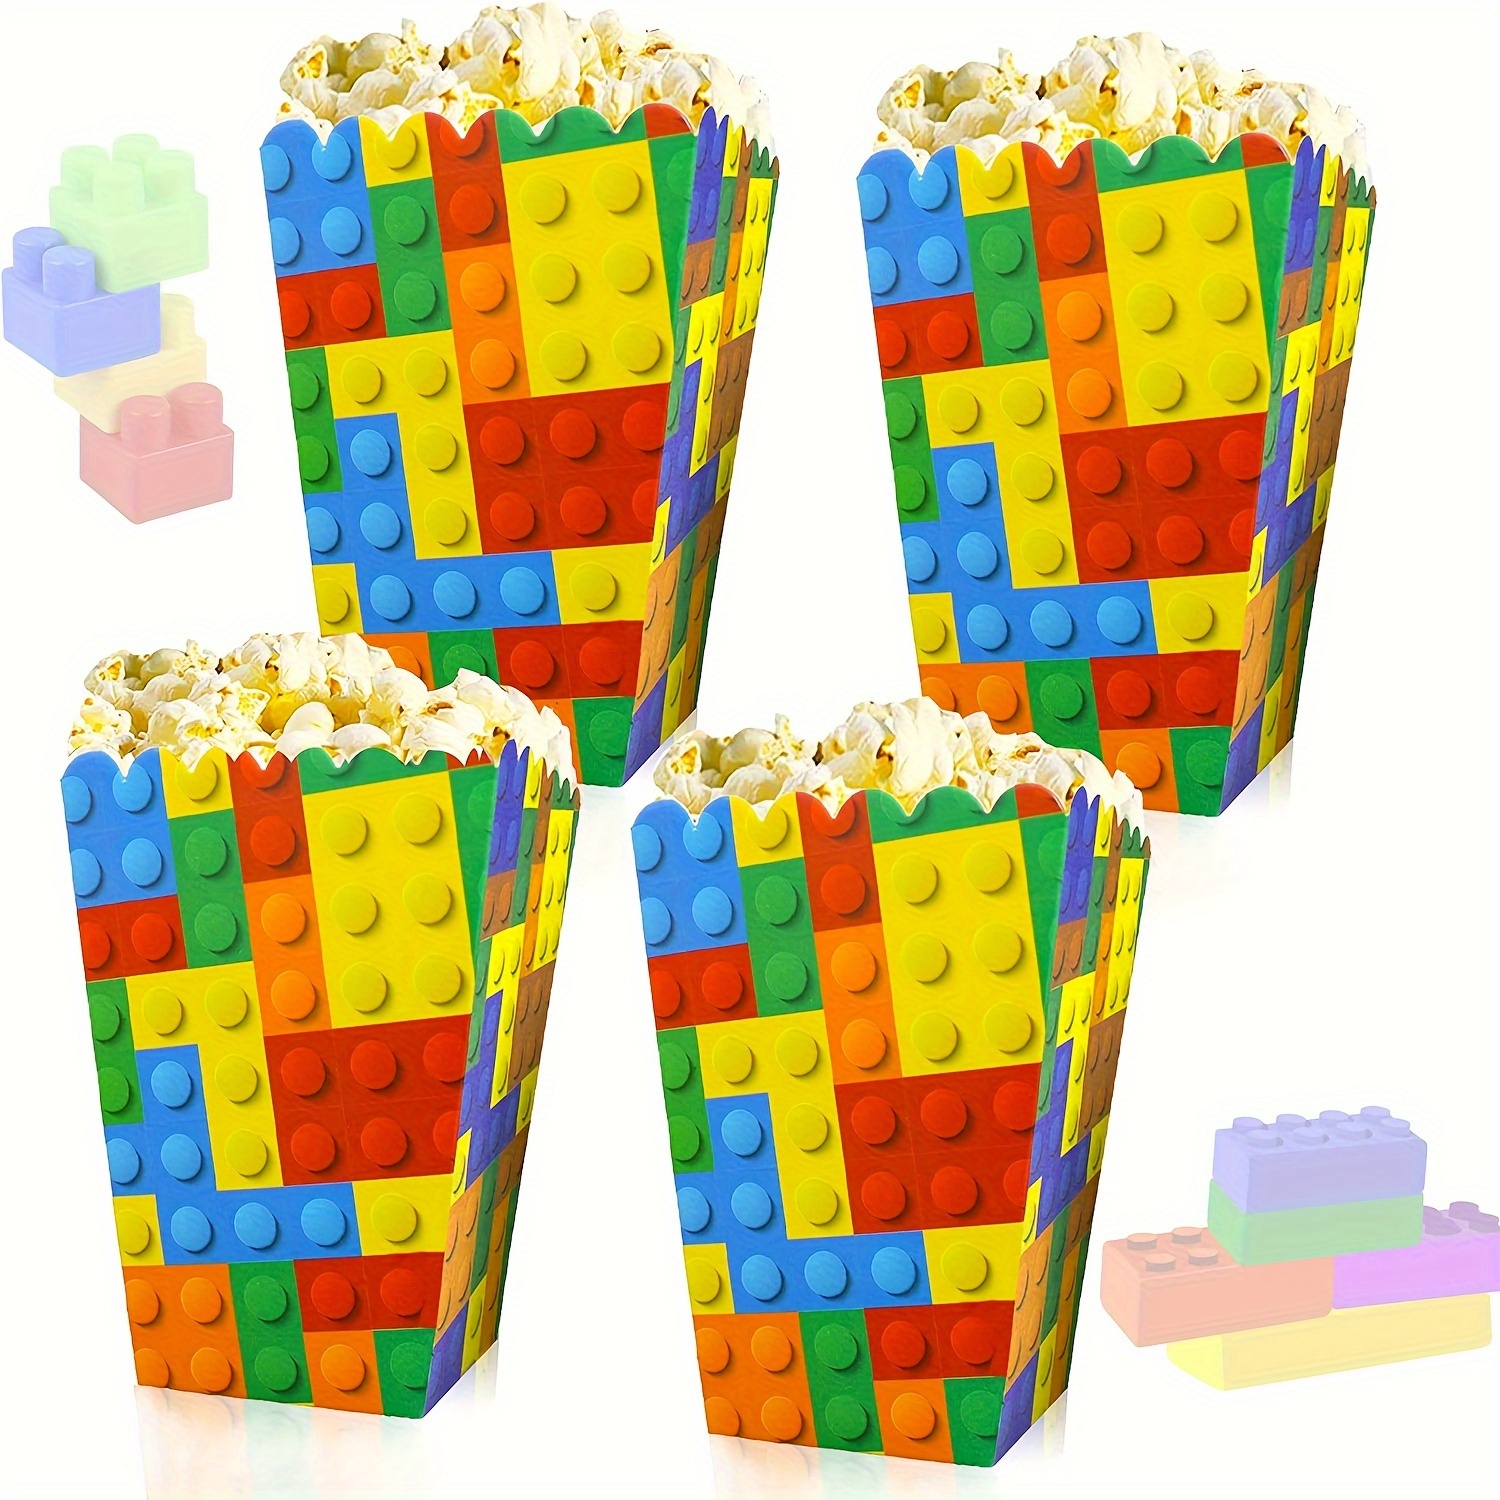 

12-piece Building Blocks Themed Party Popcorn & Candy Boxes - Perfect For Birthday, Game Night Decorations